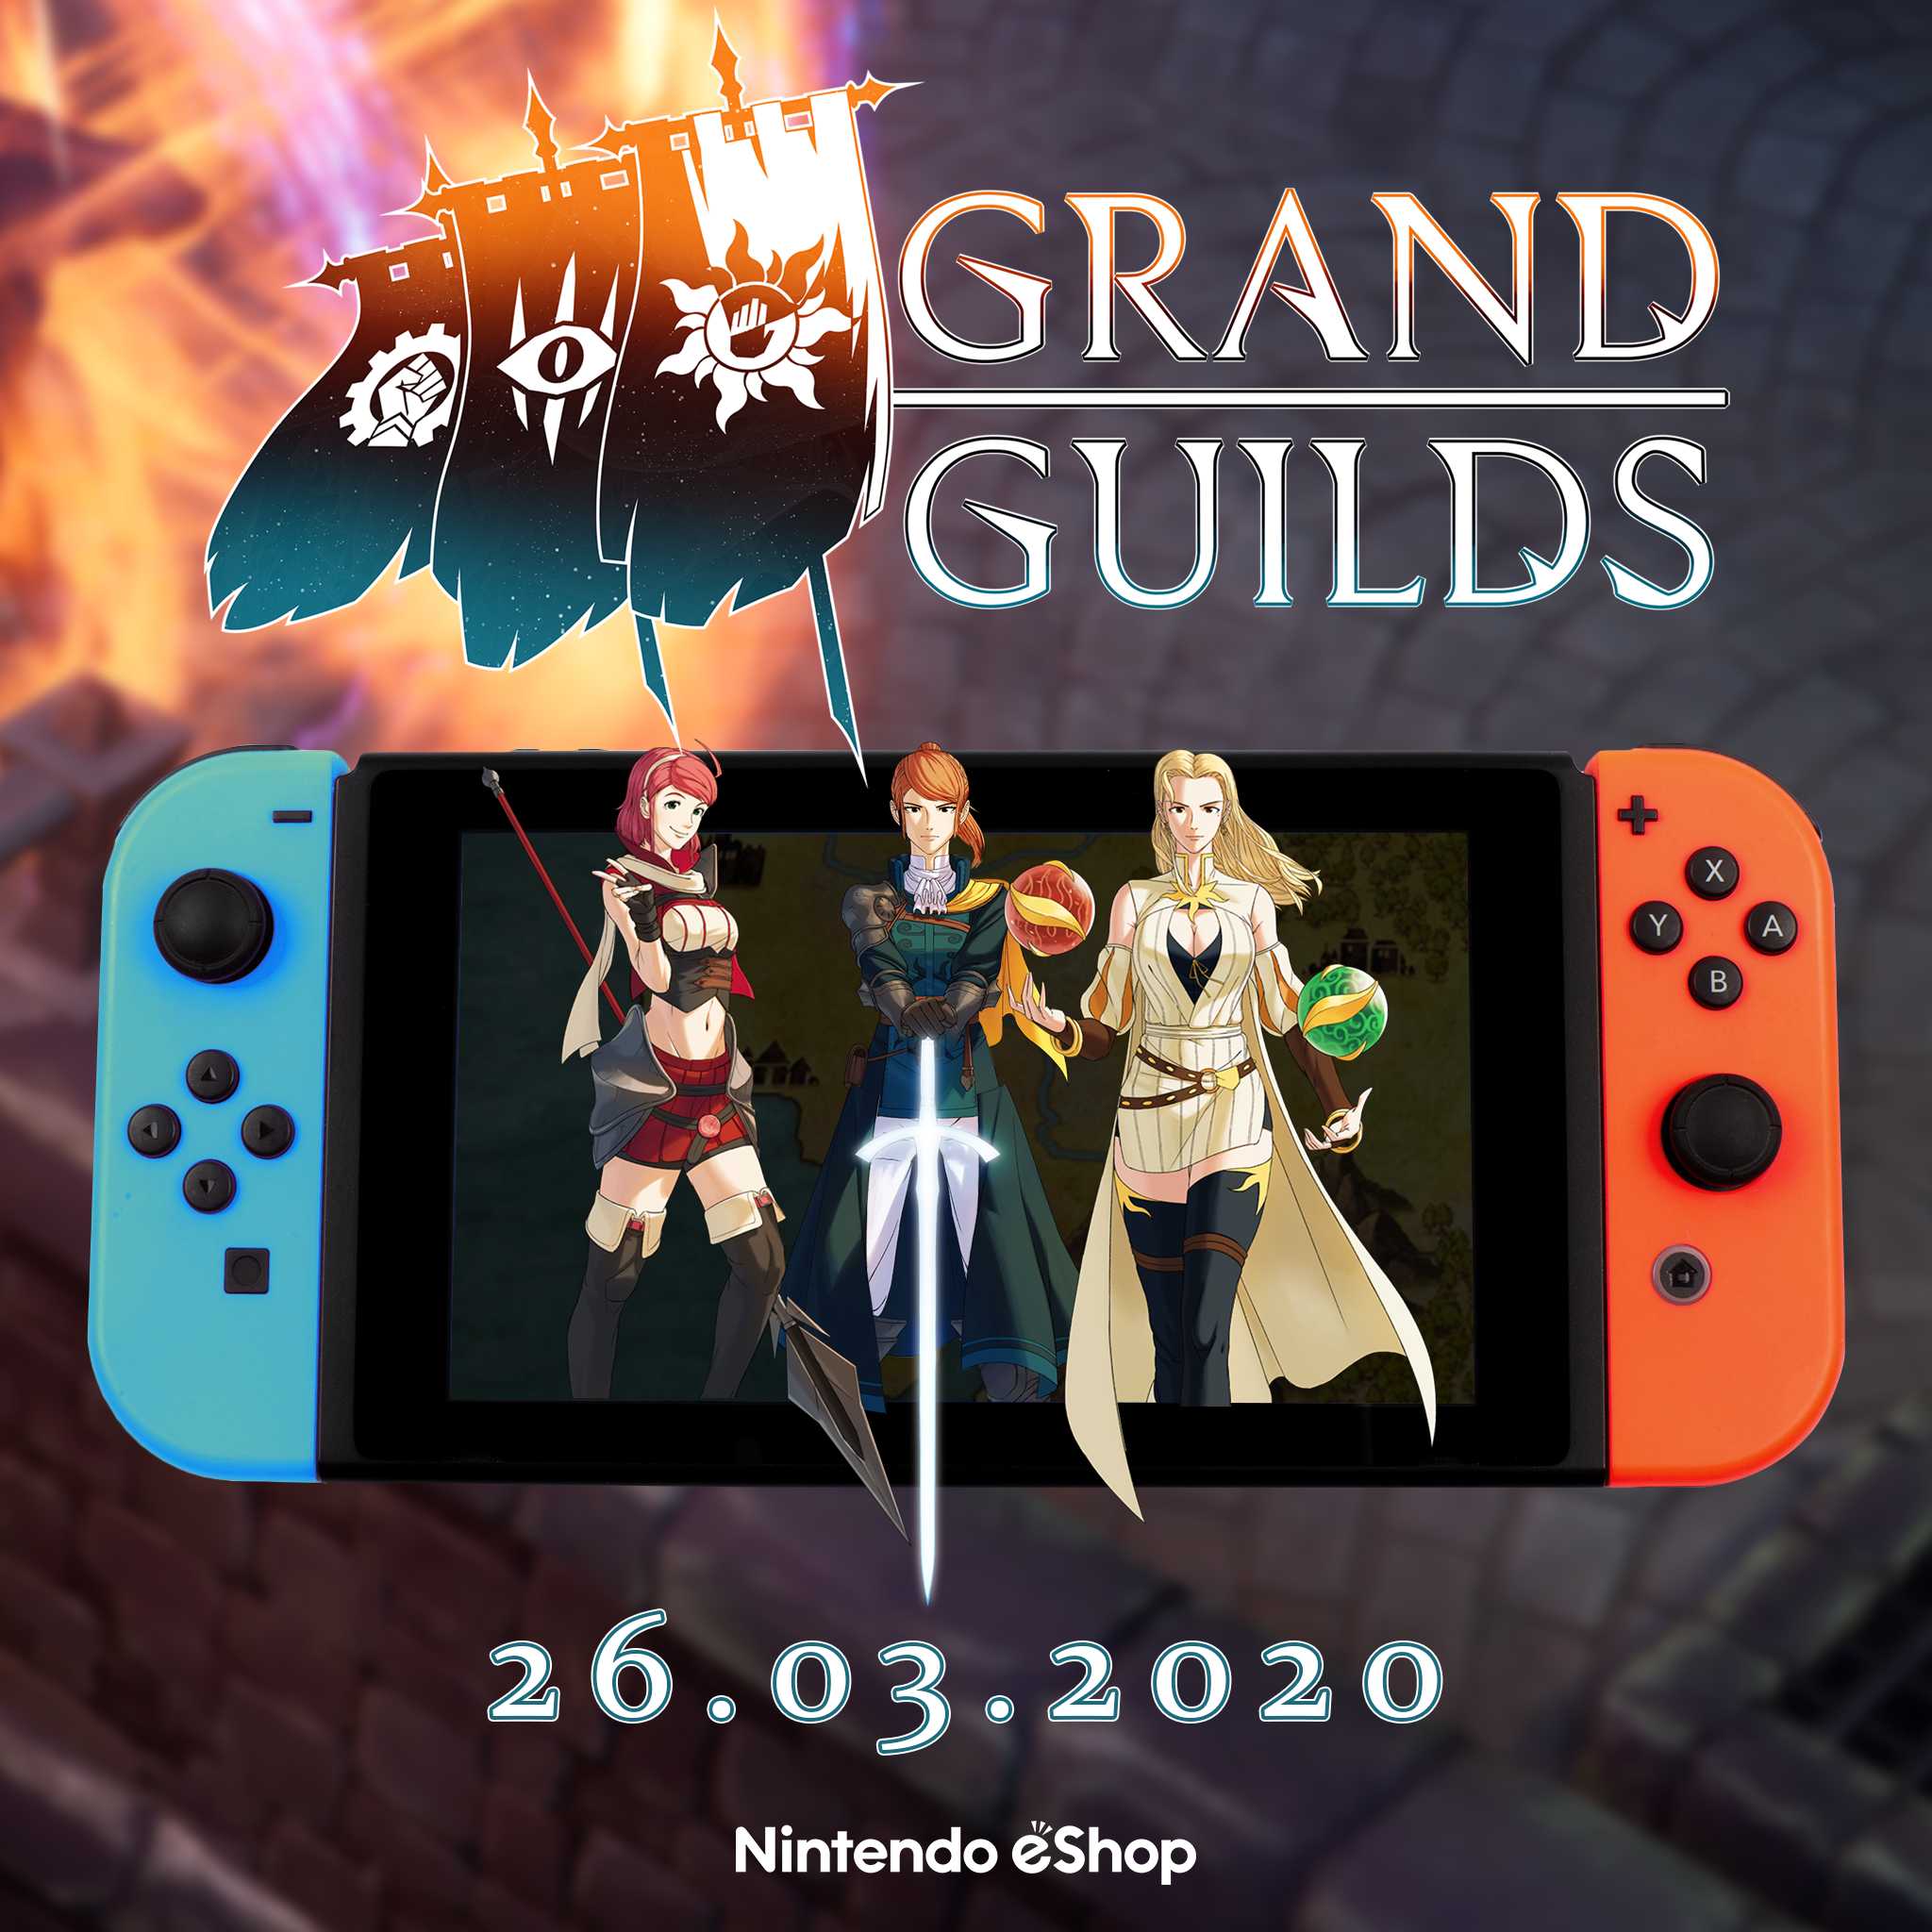 grand guilds